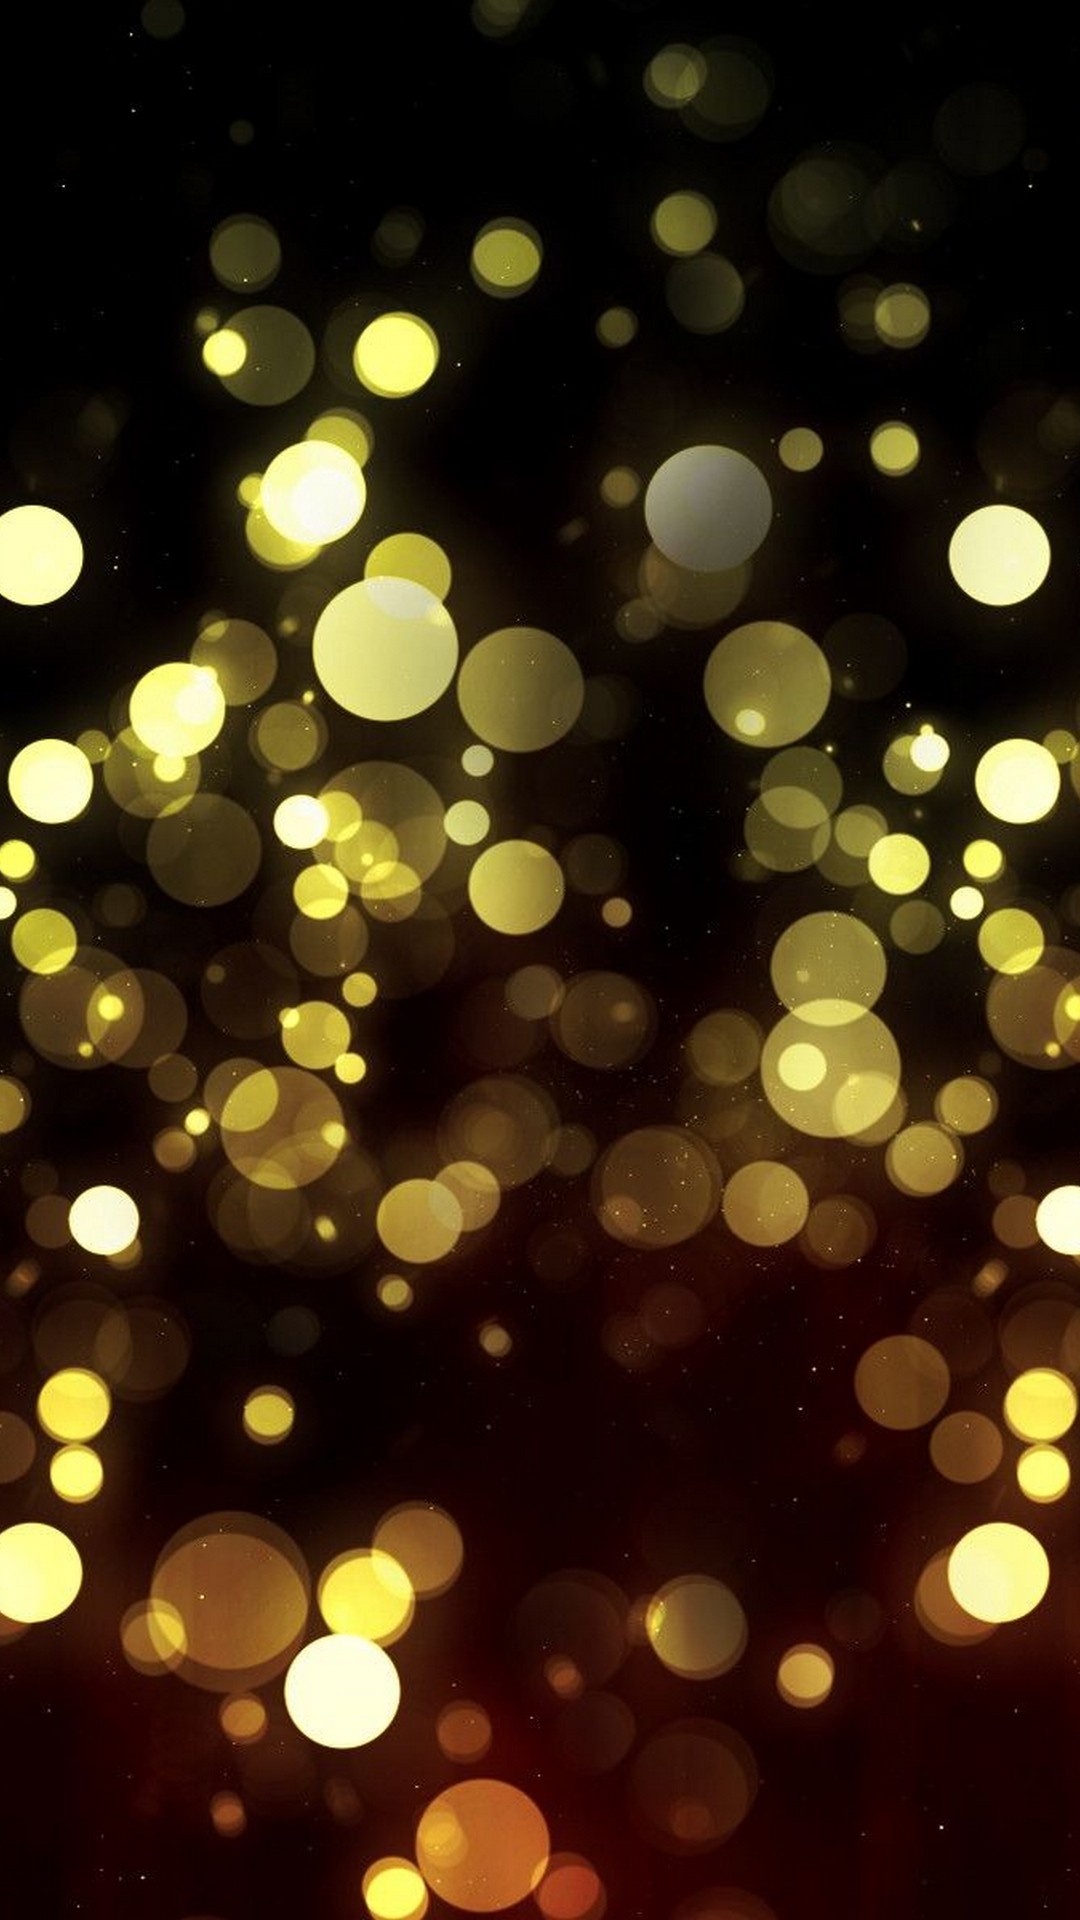 Iphone Wallpaper Black And Gold Resolution - Gold Sparkle Background - HD Wallpaper 